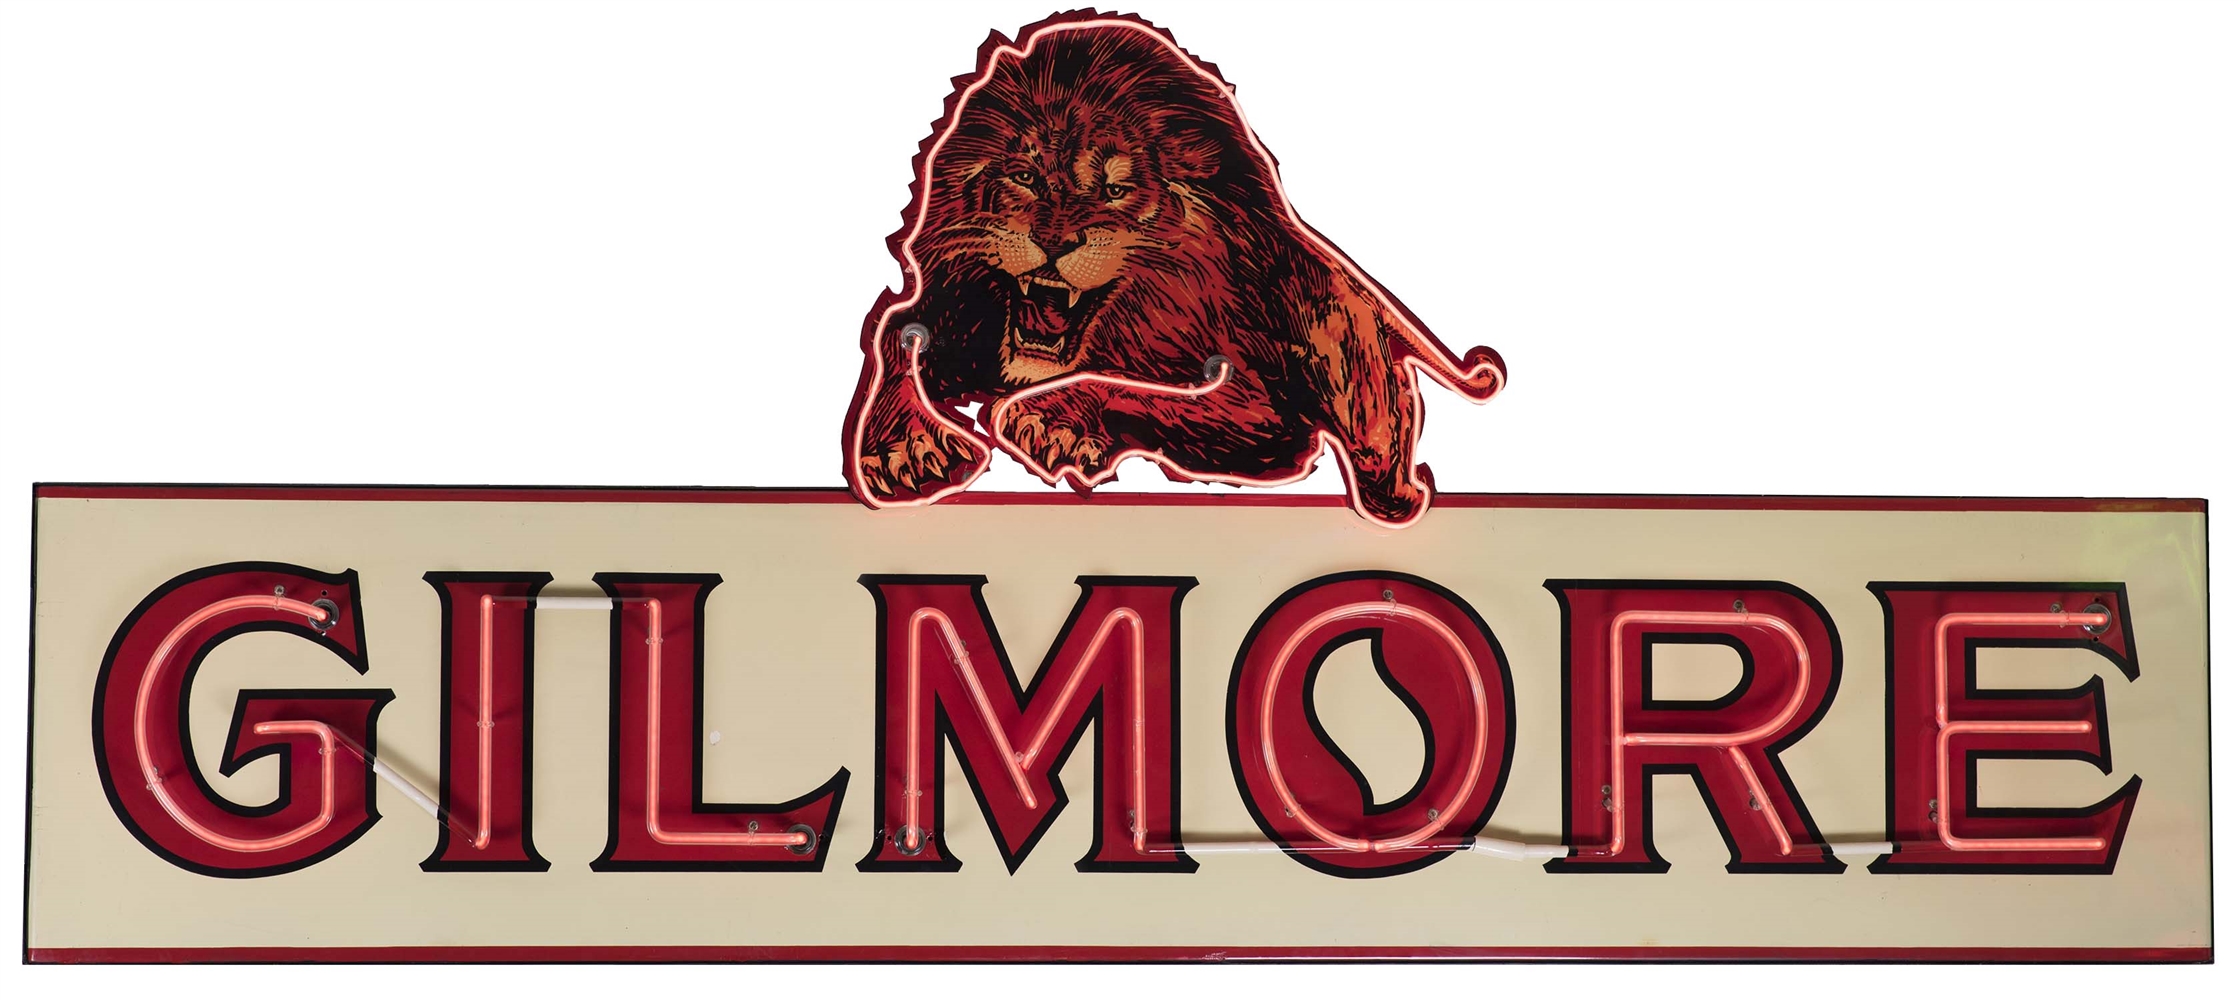 ORIGINAL GILMORE PORCELAIN NEON SIGN W/ ADDED LION GRAPHIC ON TOP. 